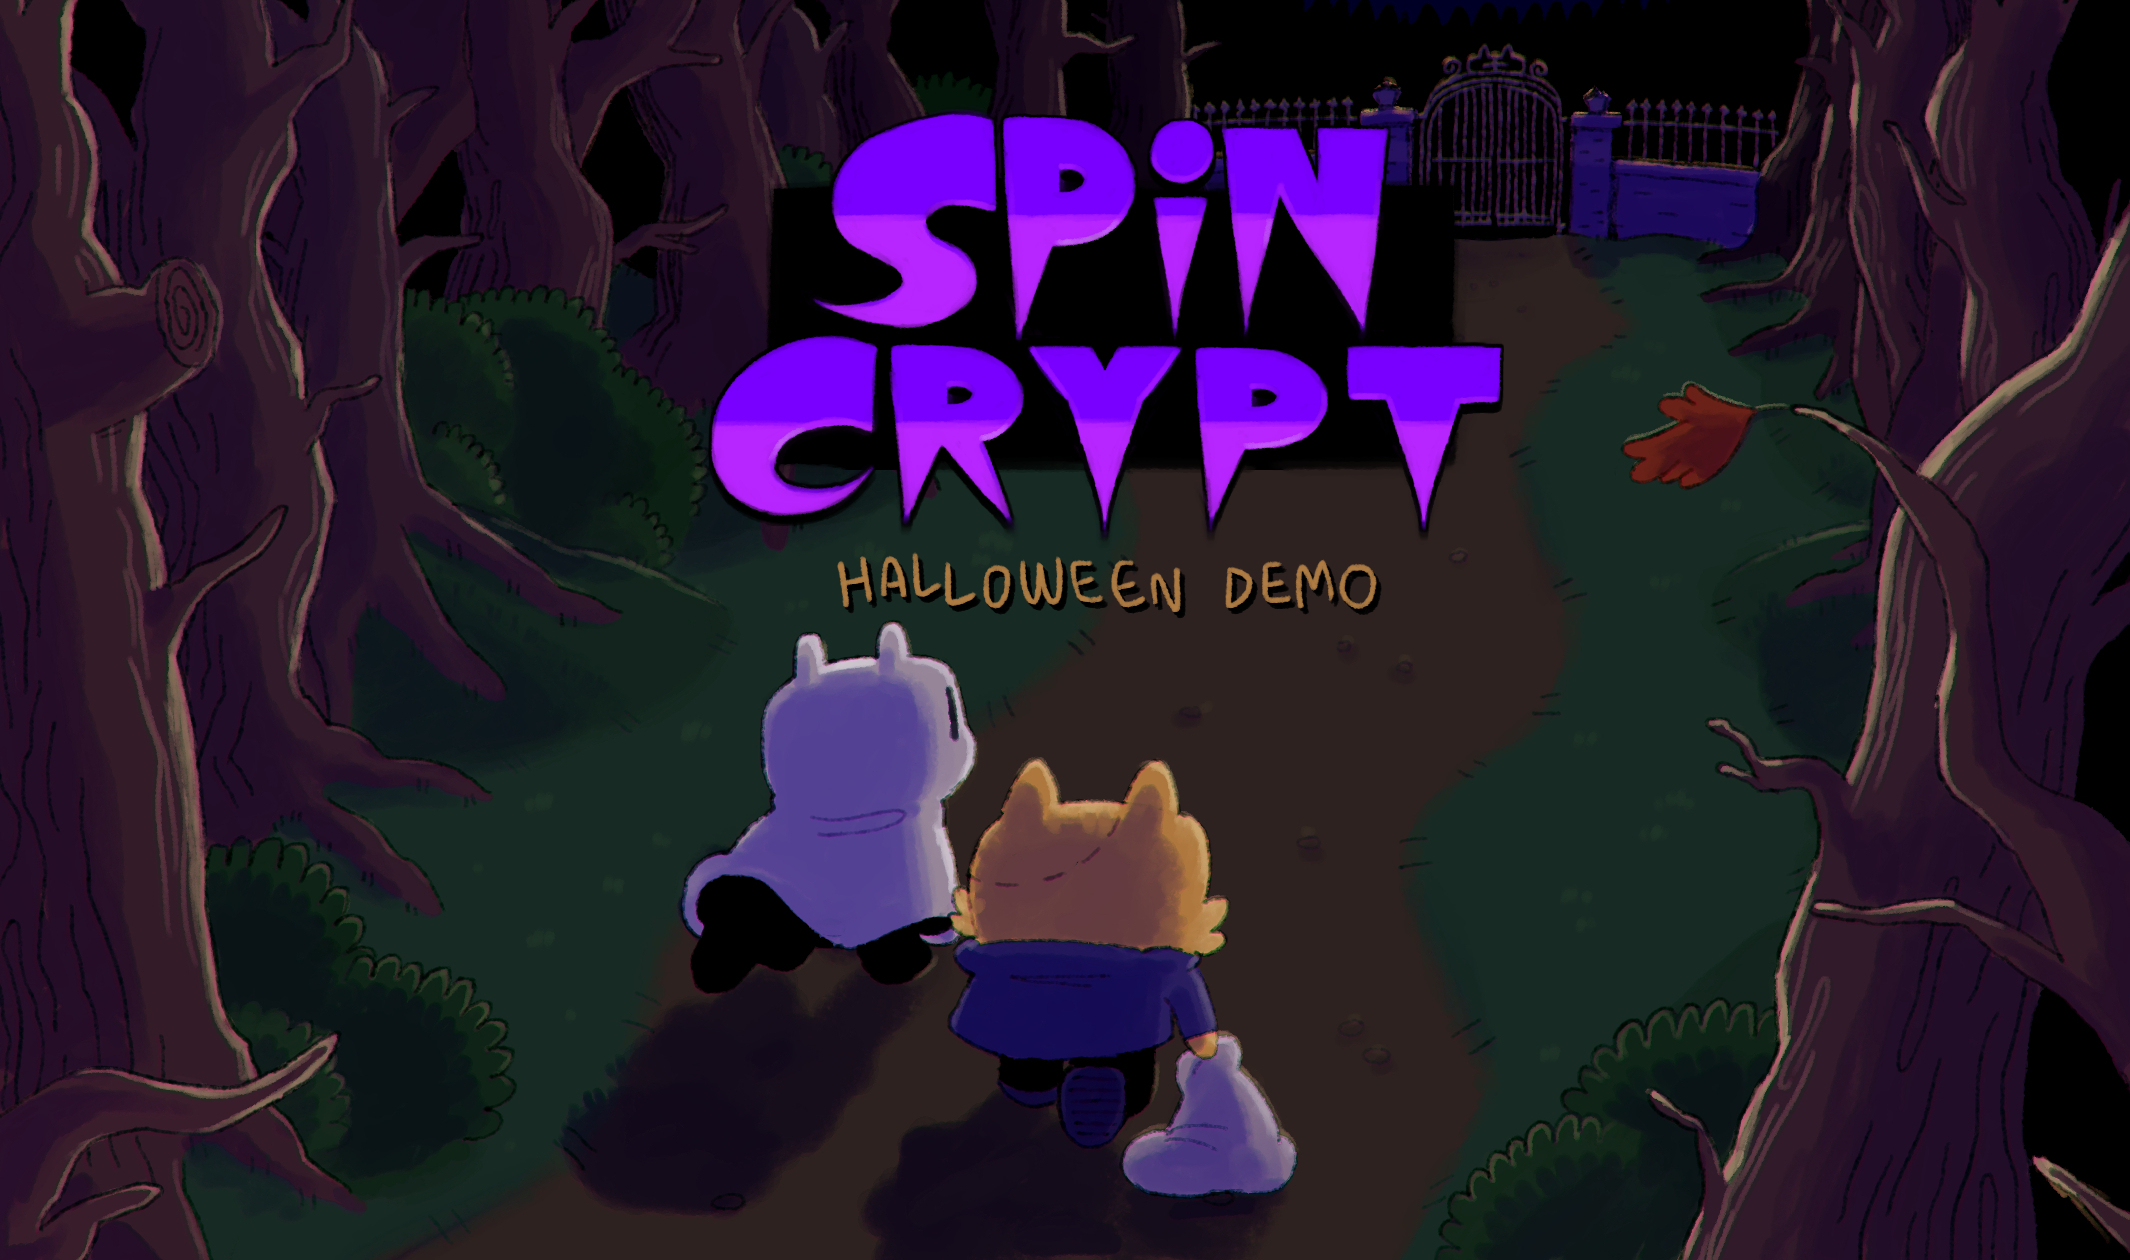 SPIN CRYPT Halloween Demo